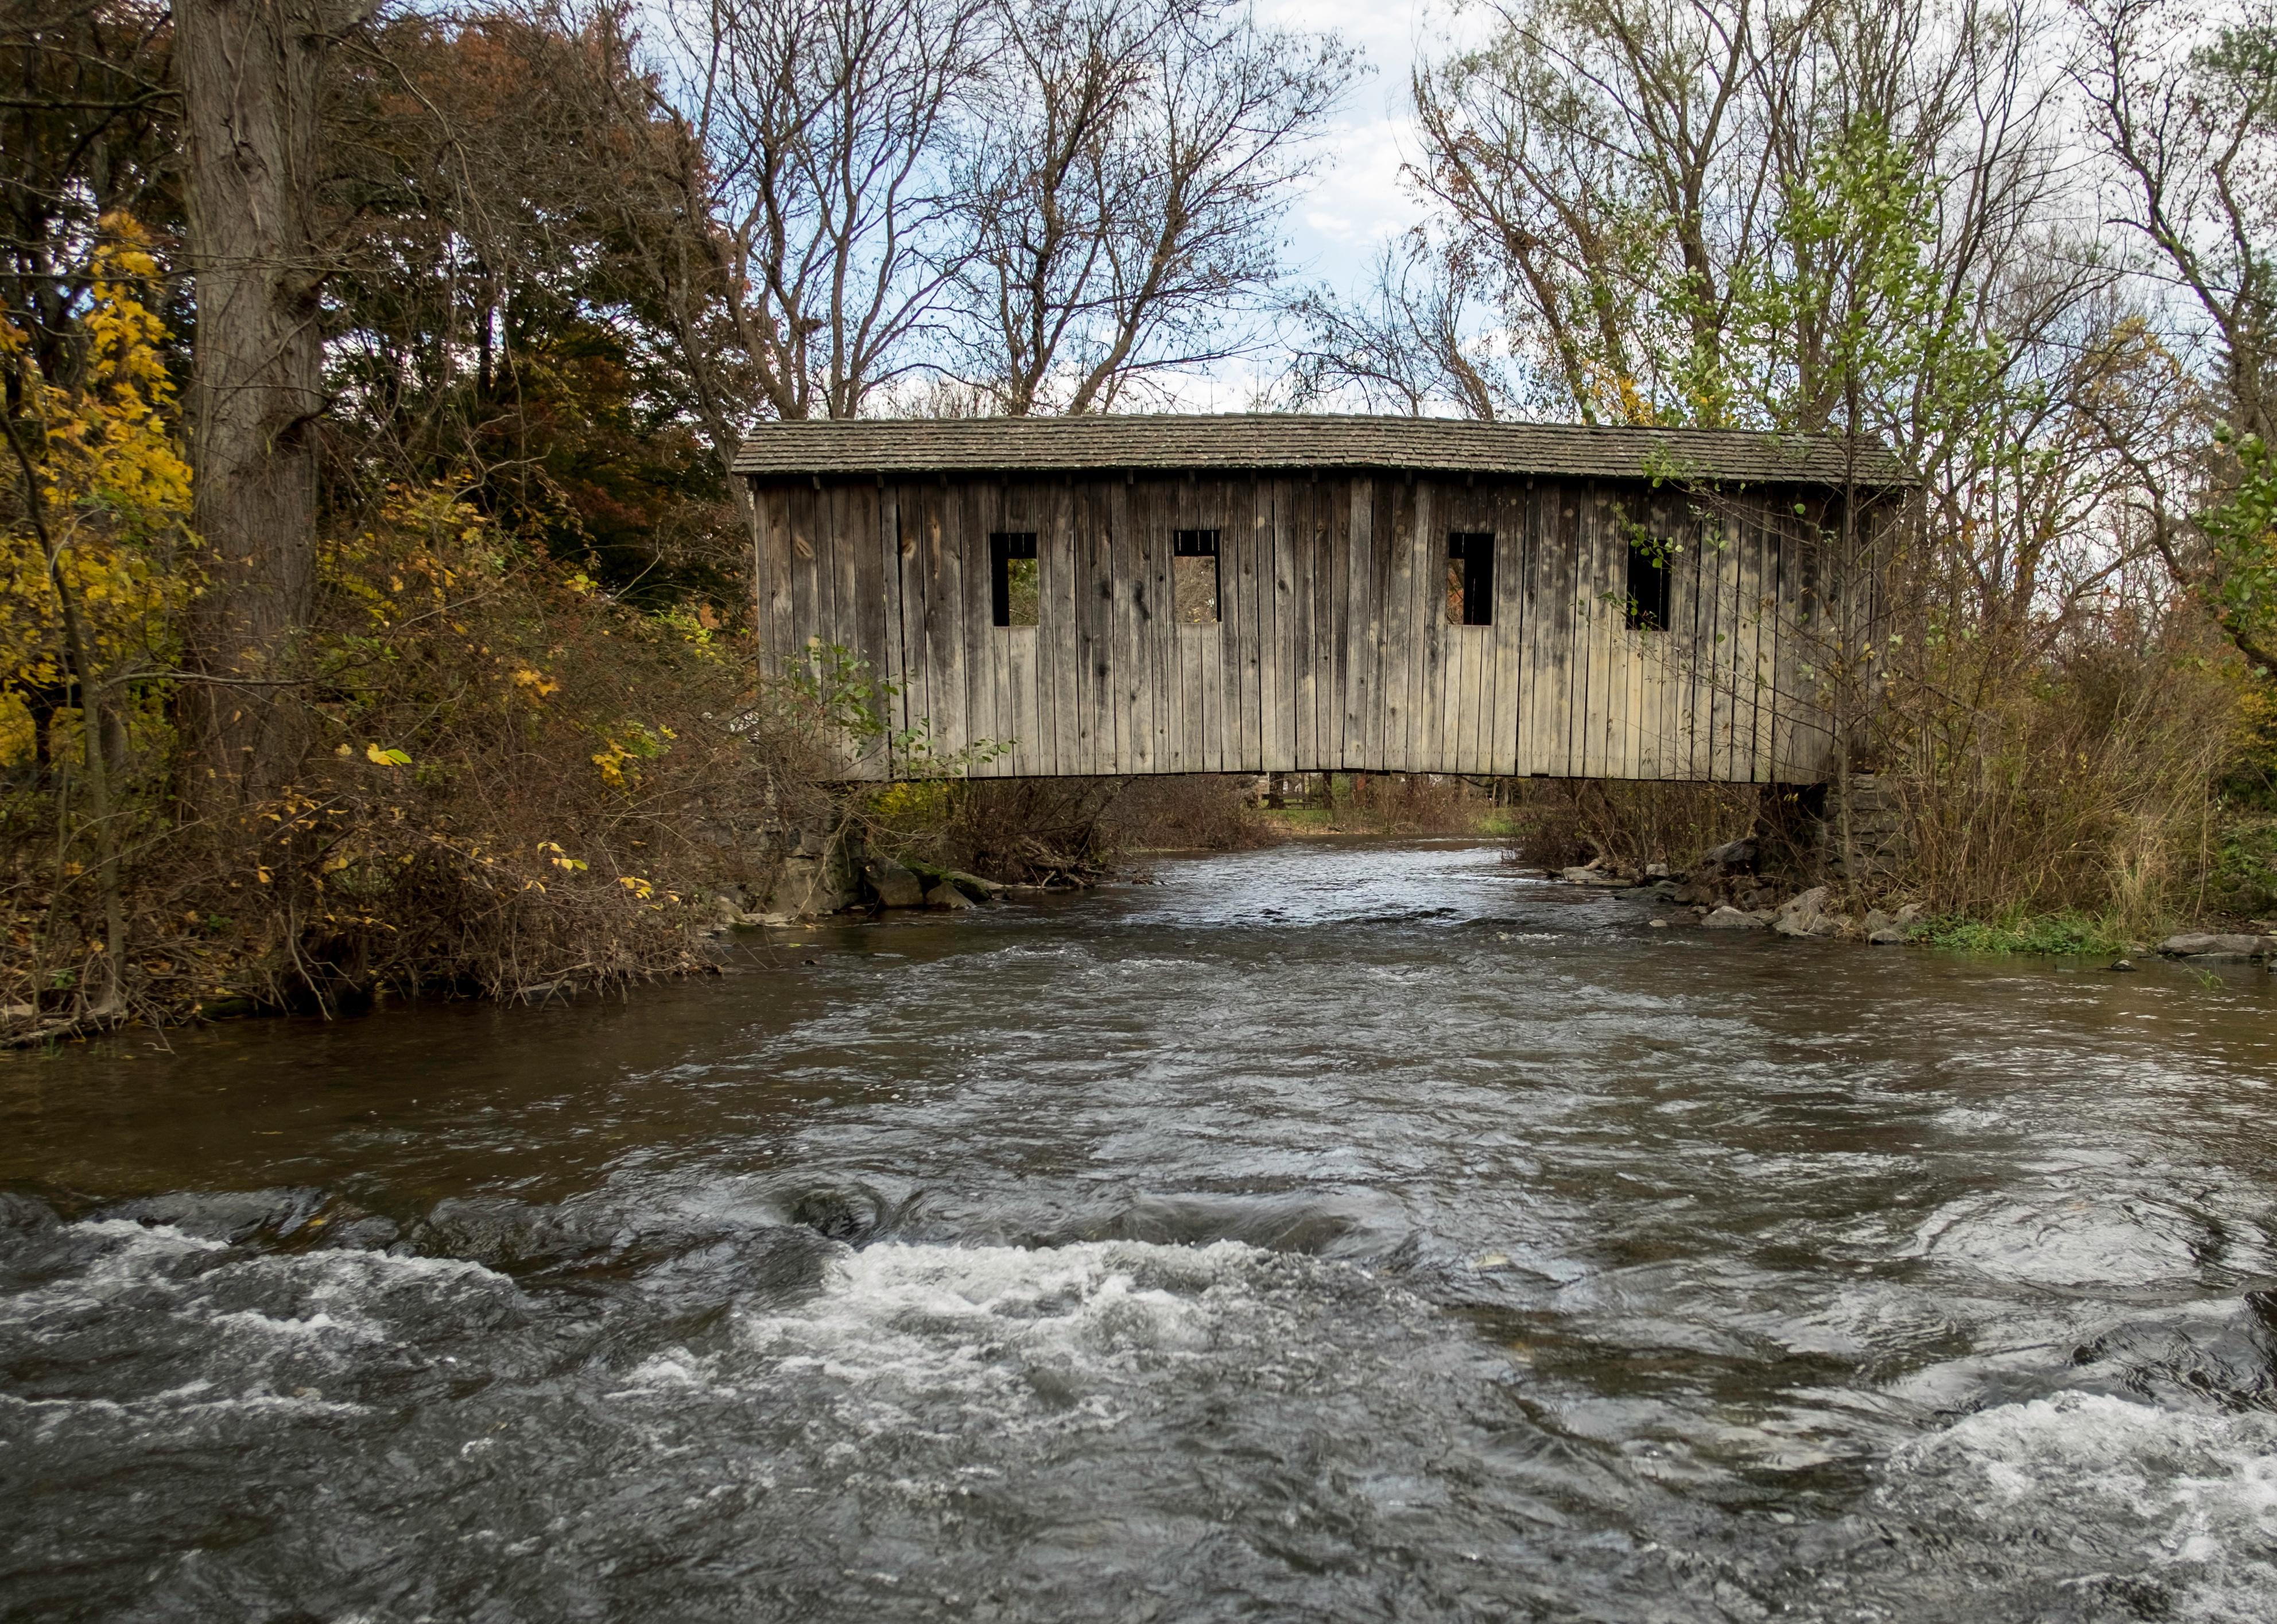 An old wooden covered bridge.